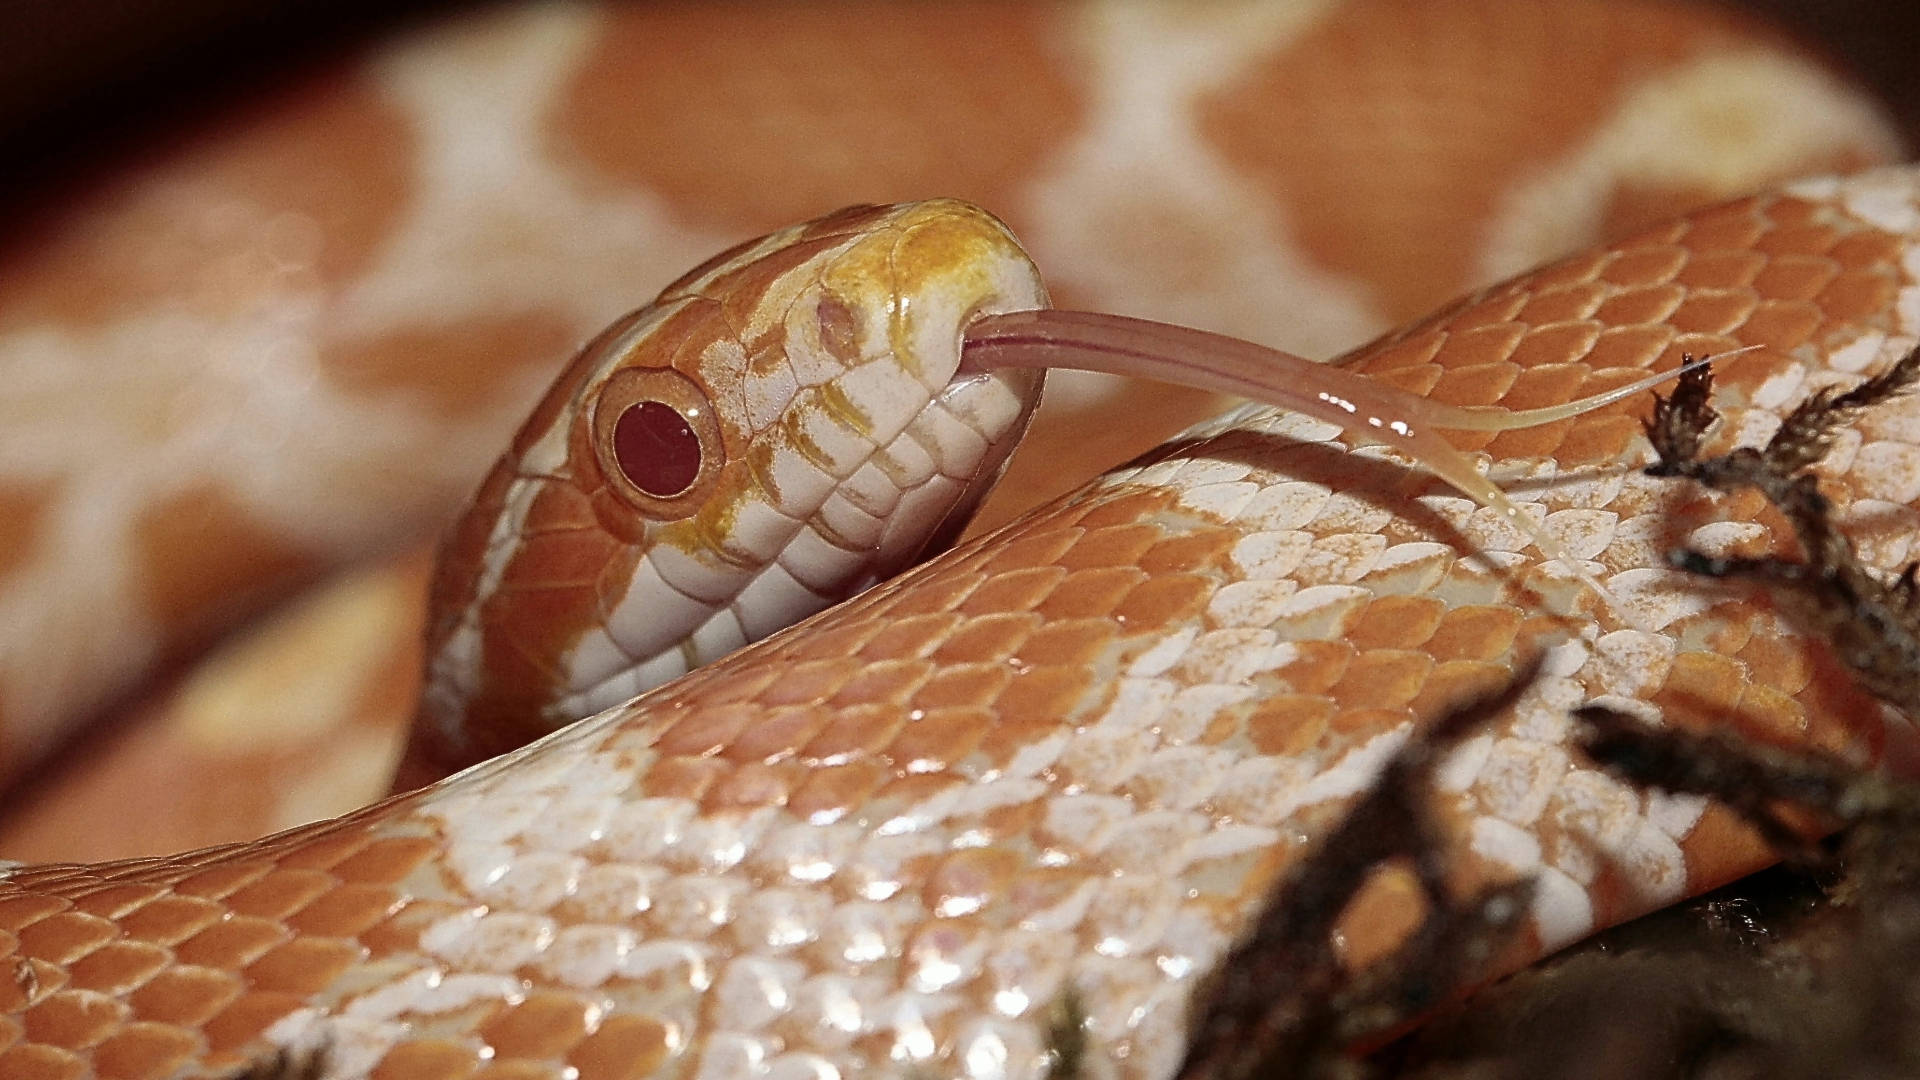 Exquisite Corn Snake In Its Natural Environment Wallpaper